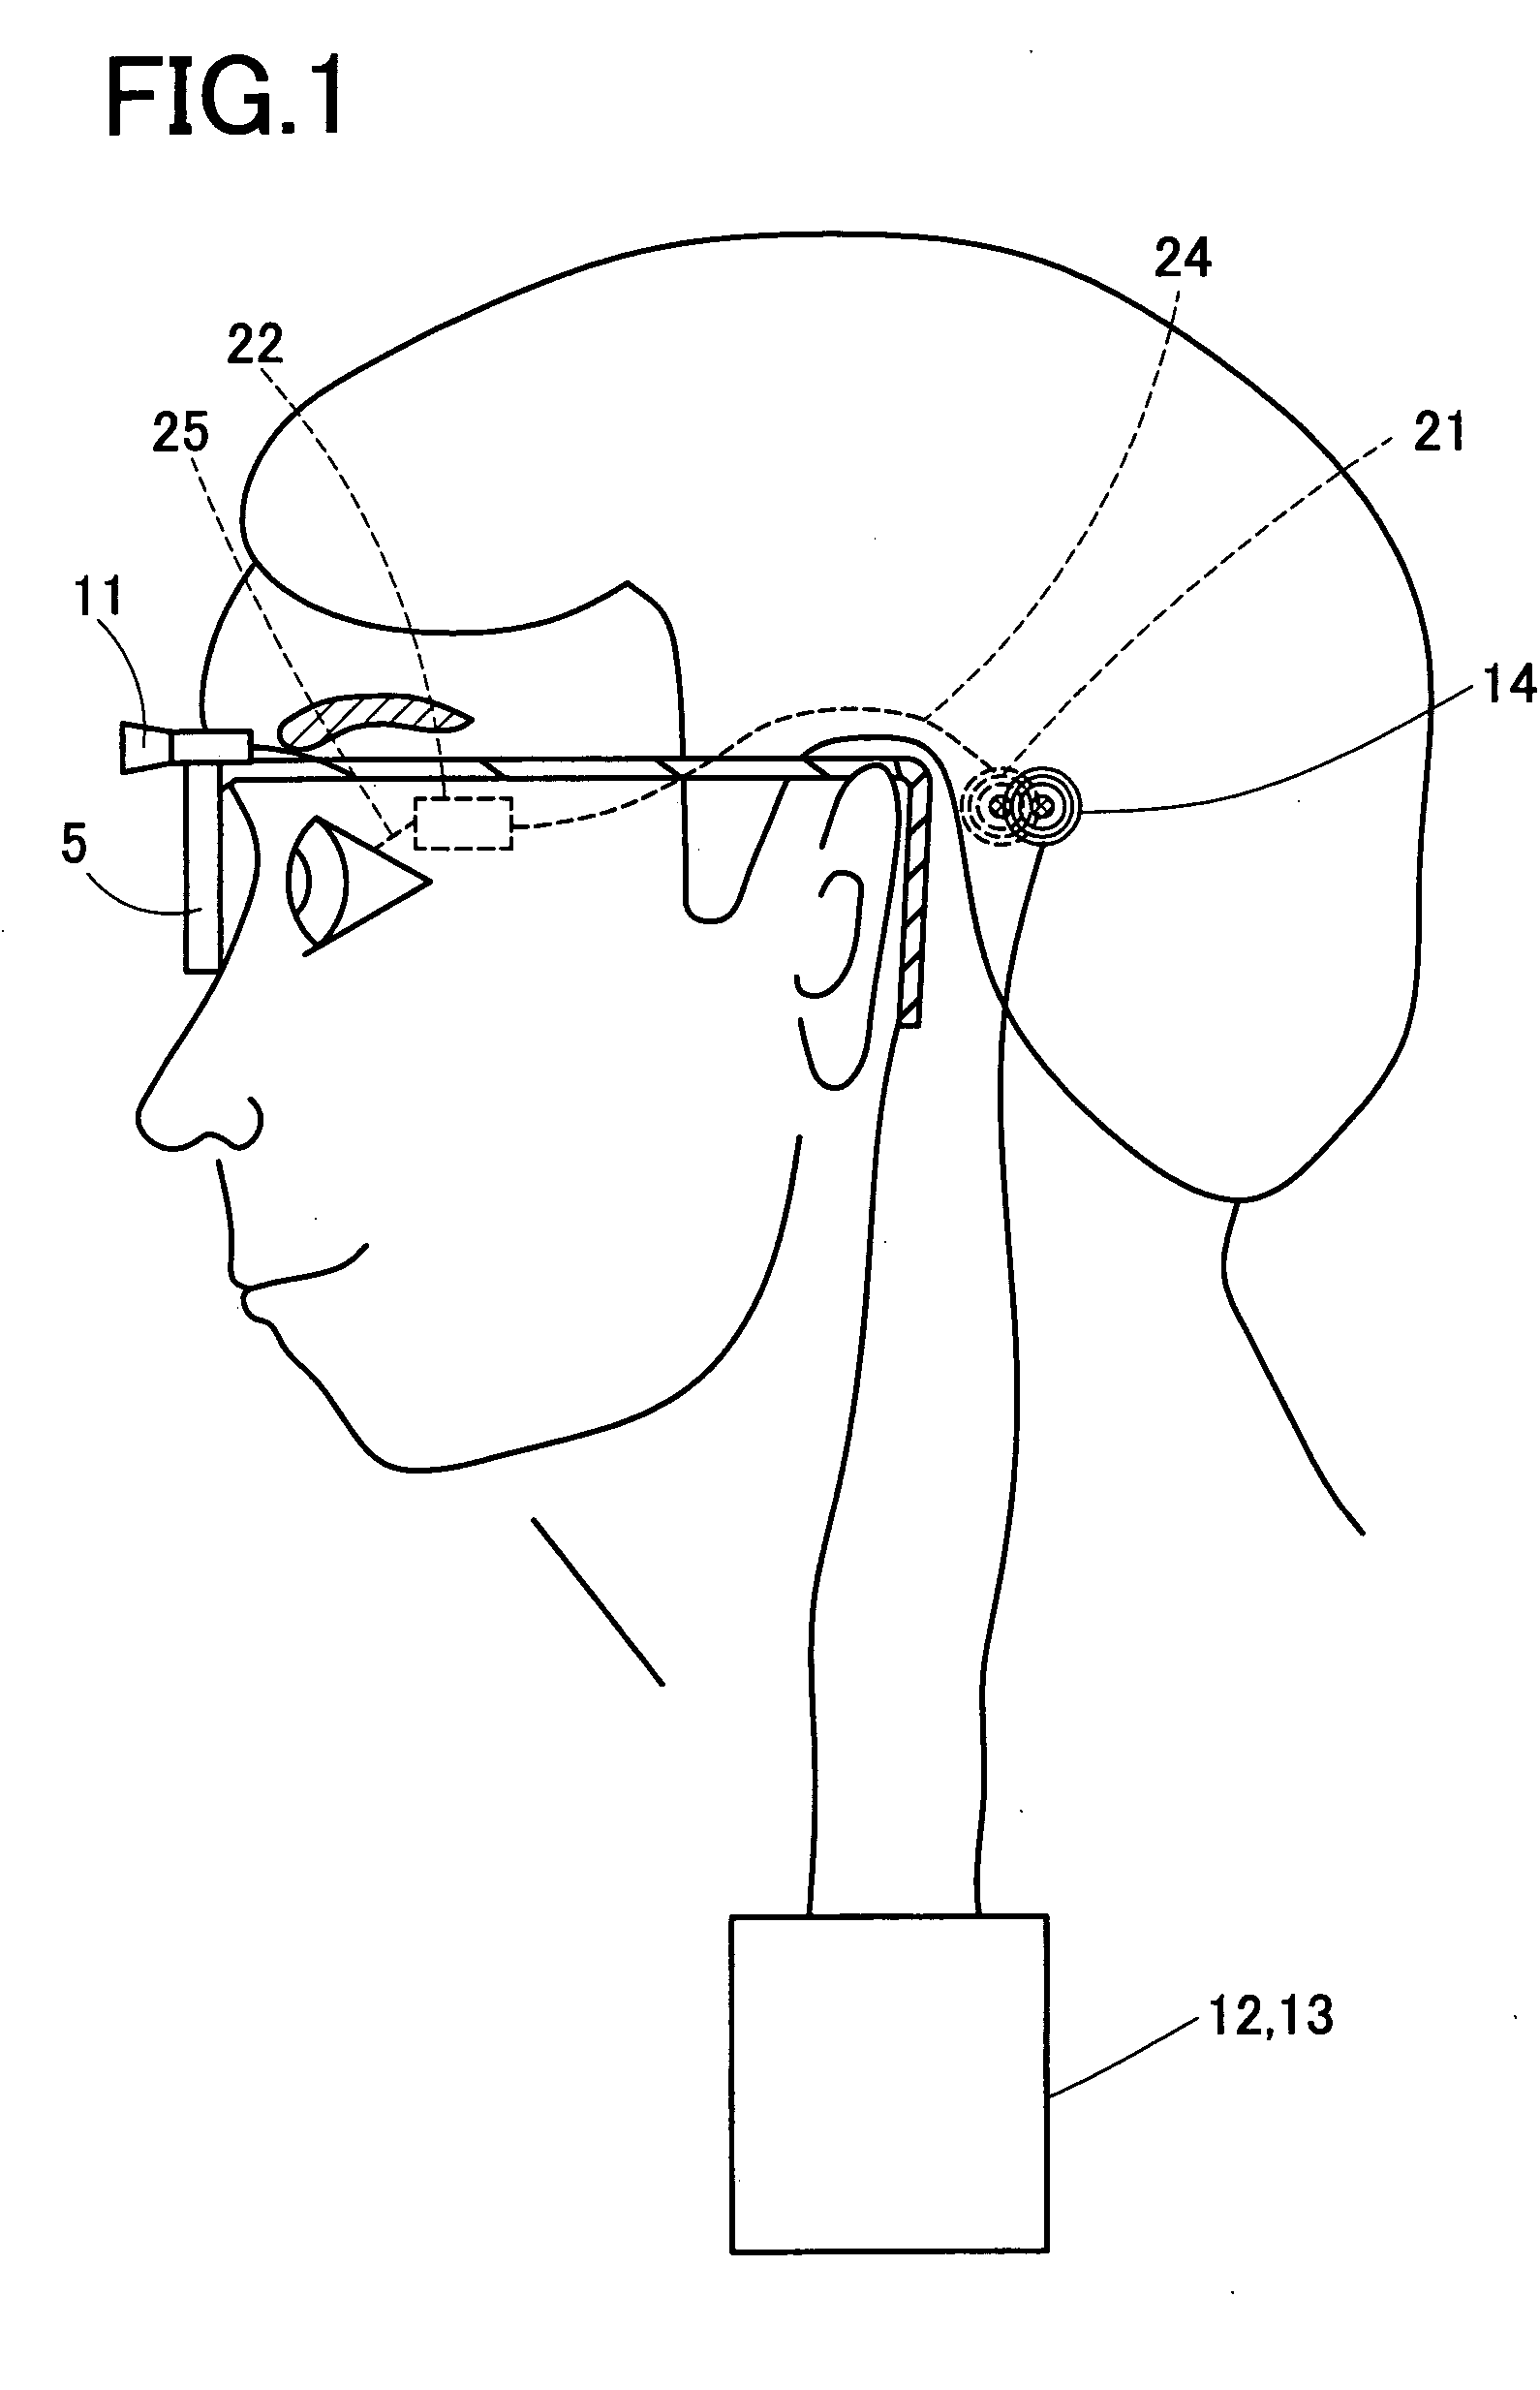 Artificail vision system